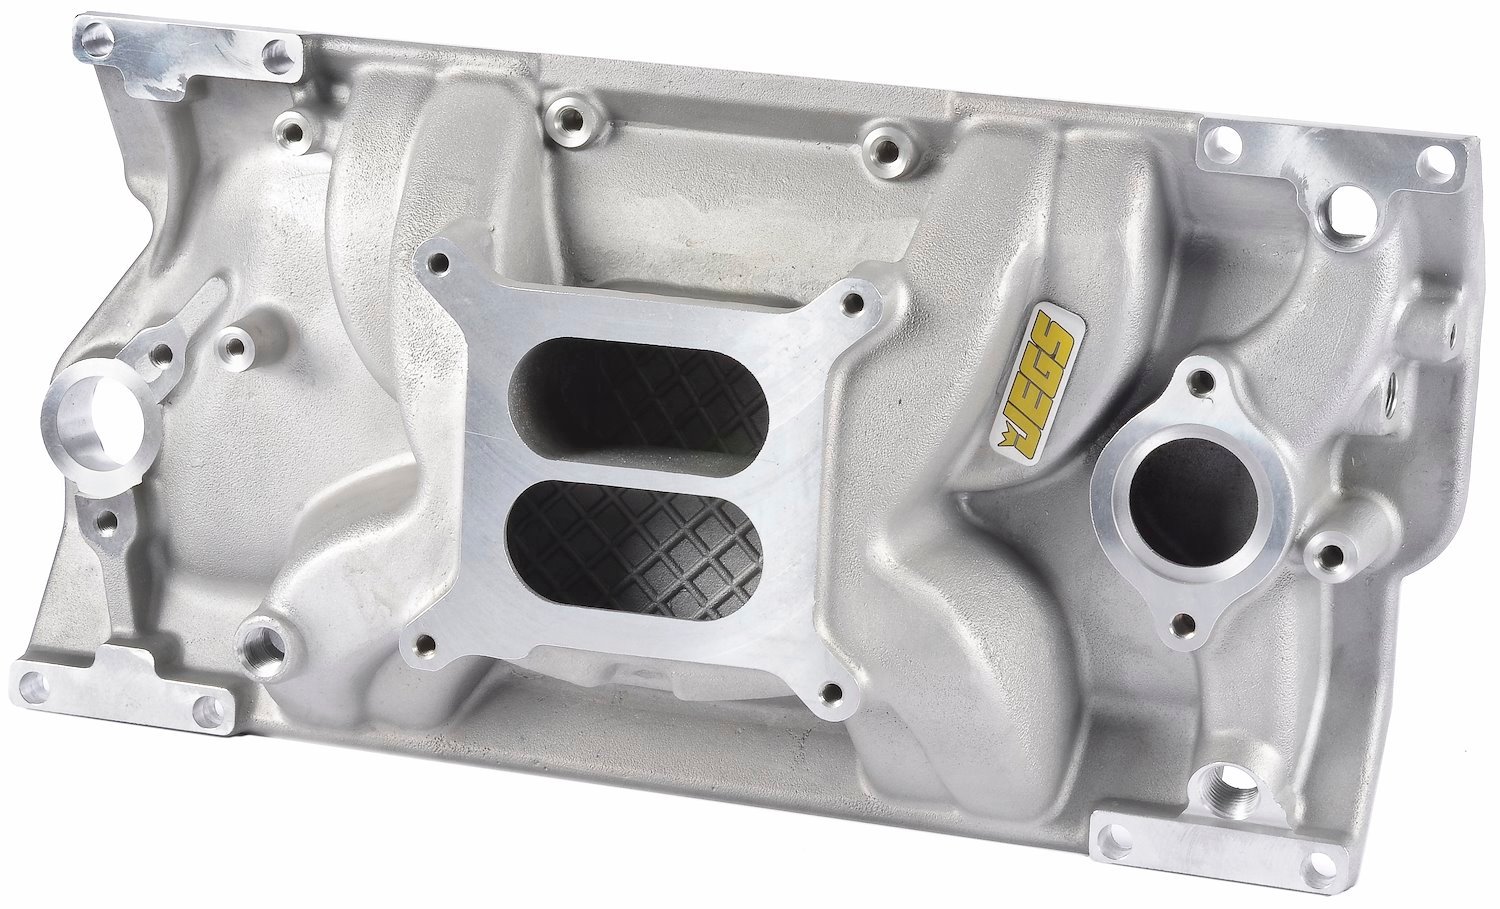 JEGS Vortec Intake Manifold For Small Block Chevy - 1996-2002 Chevy Small Block Cast Iron Heads